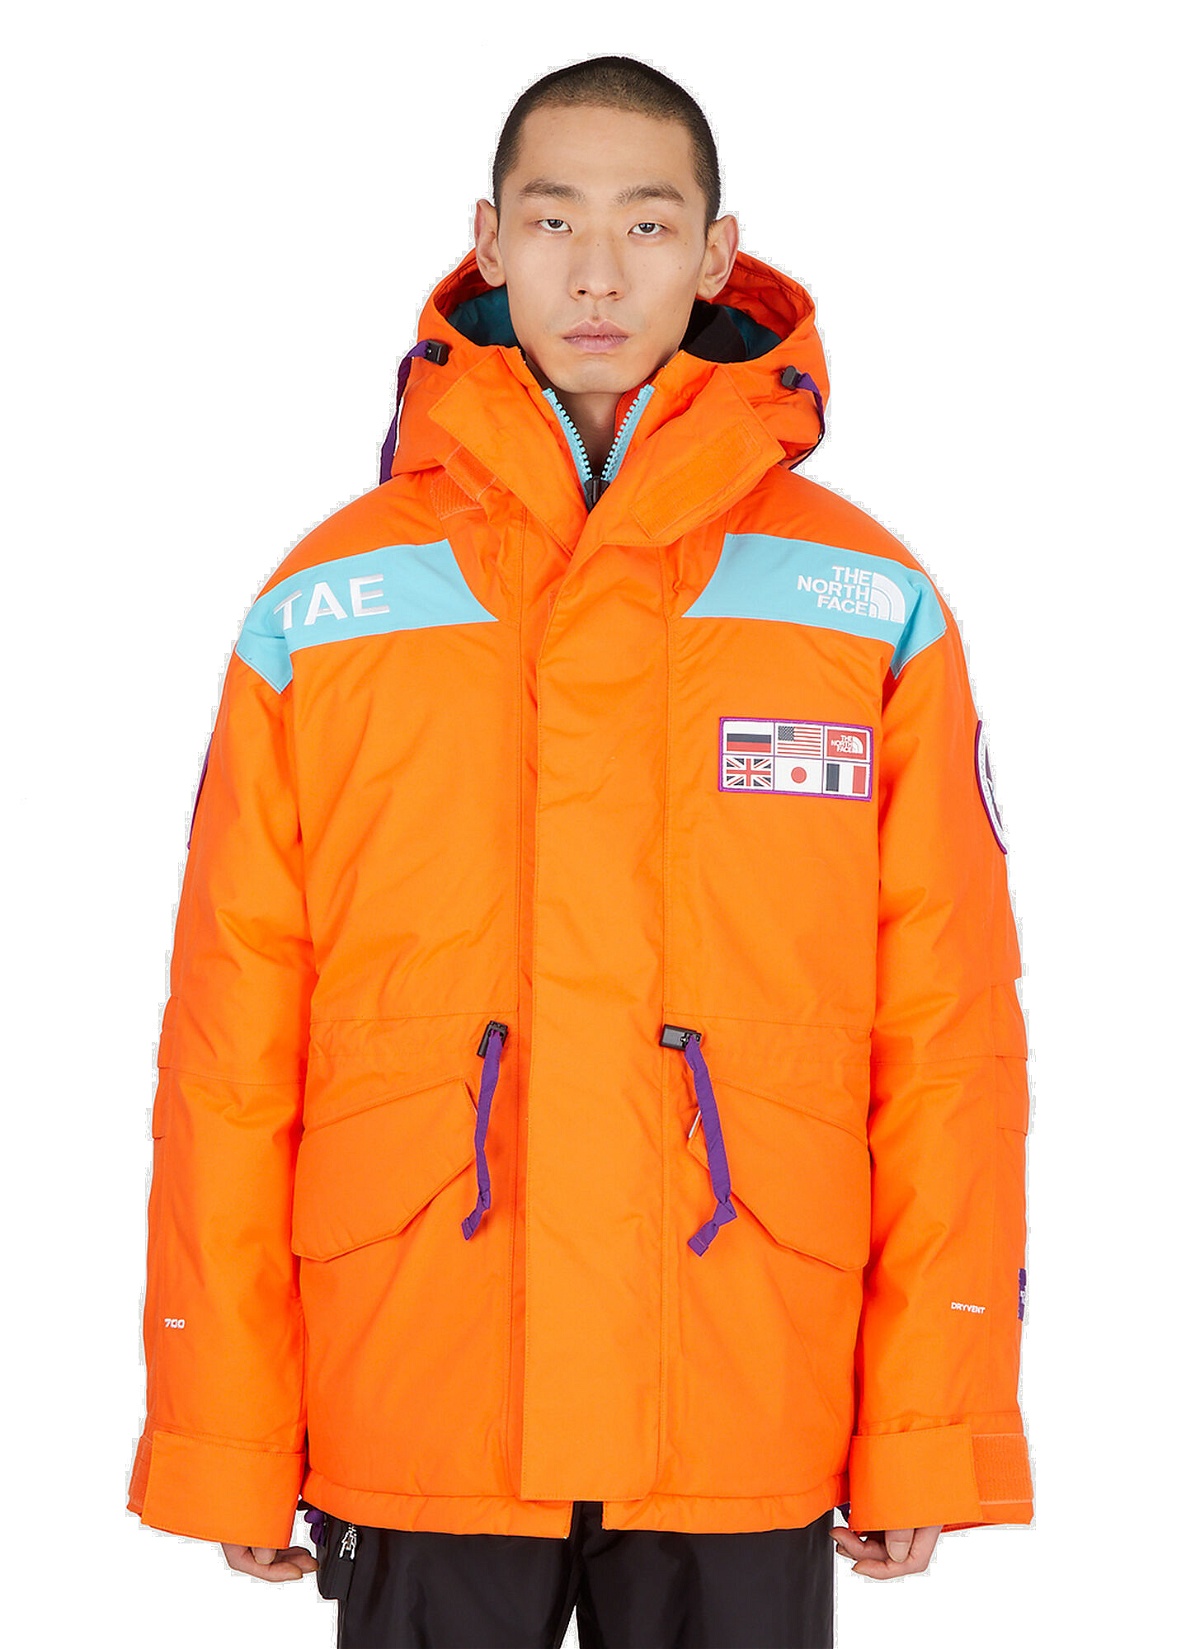 Trans Antarctica Expedition Jacket in Face North The Orange